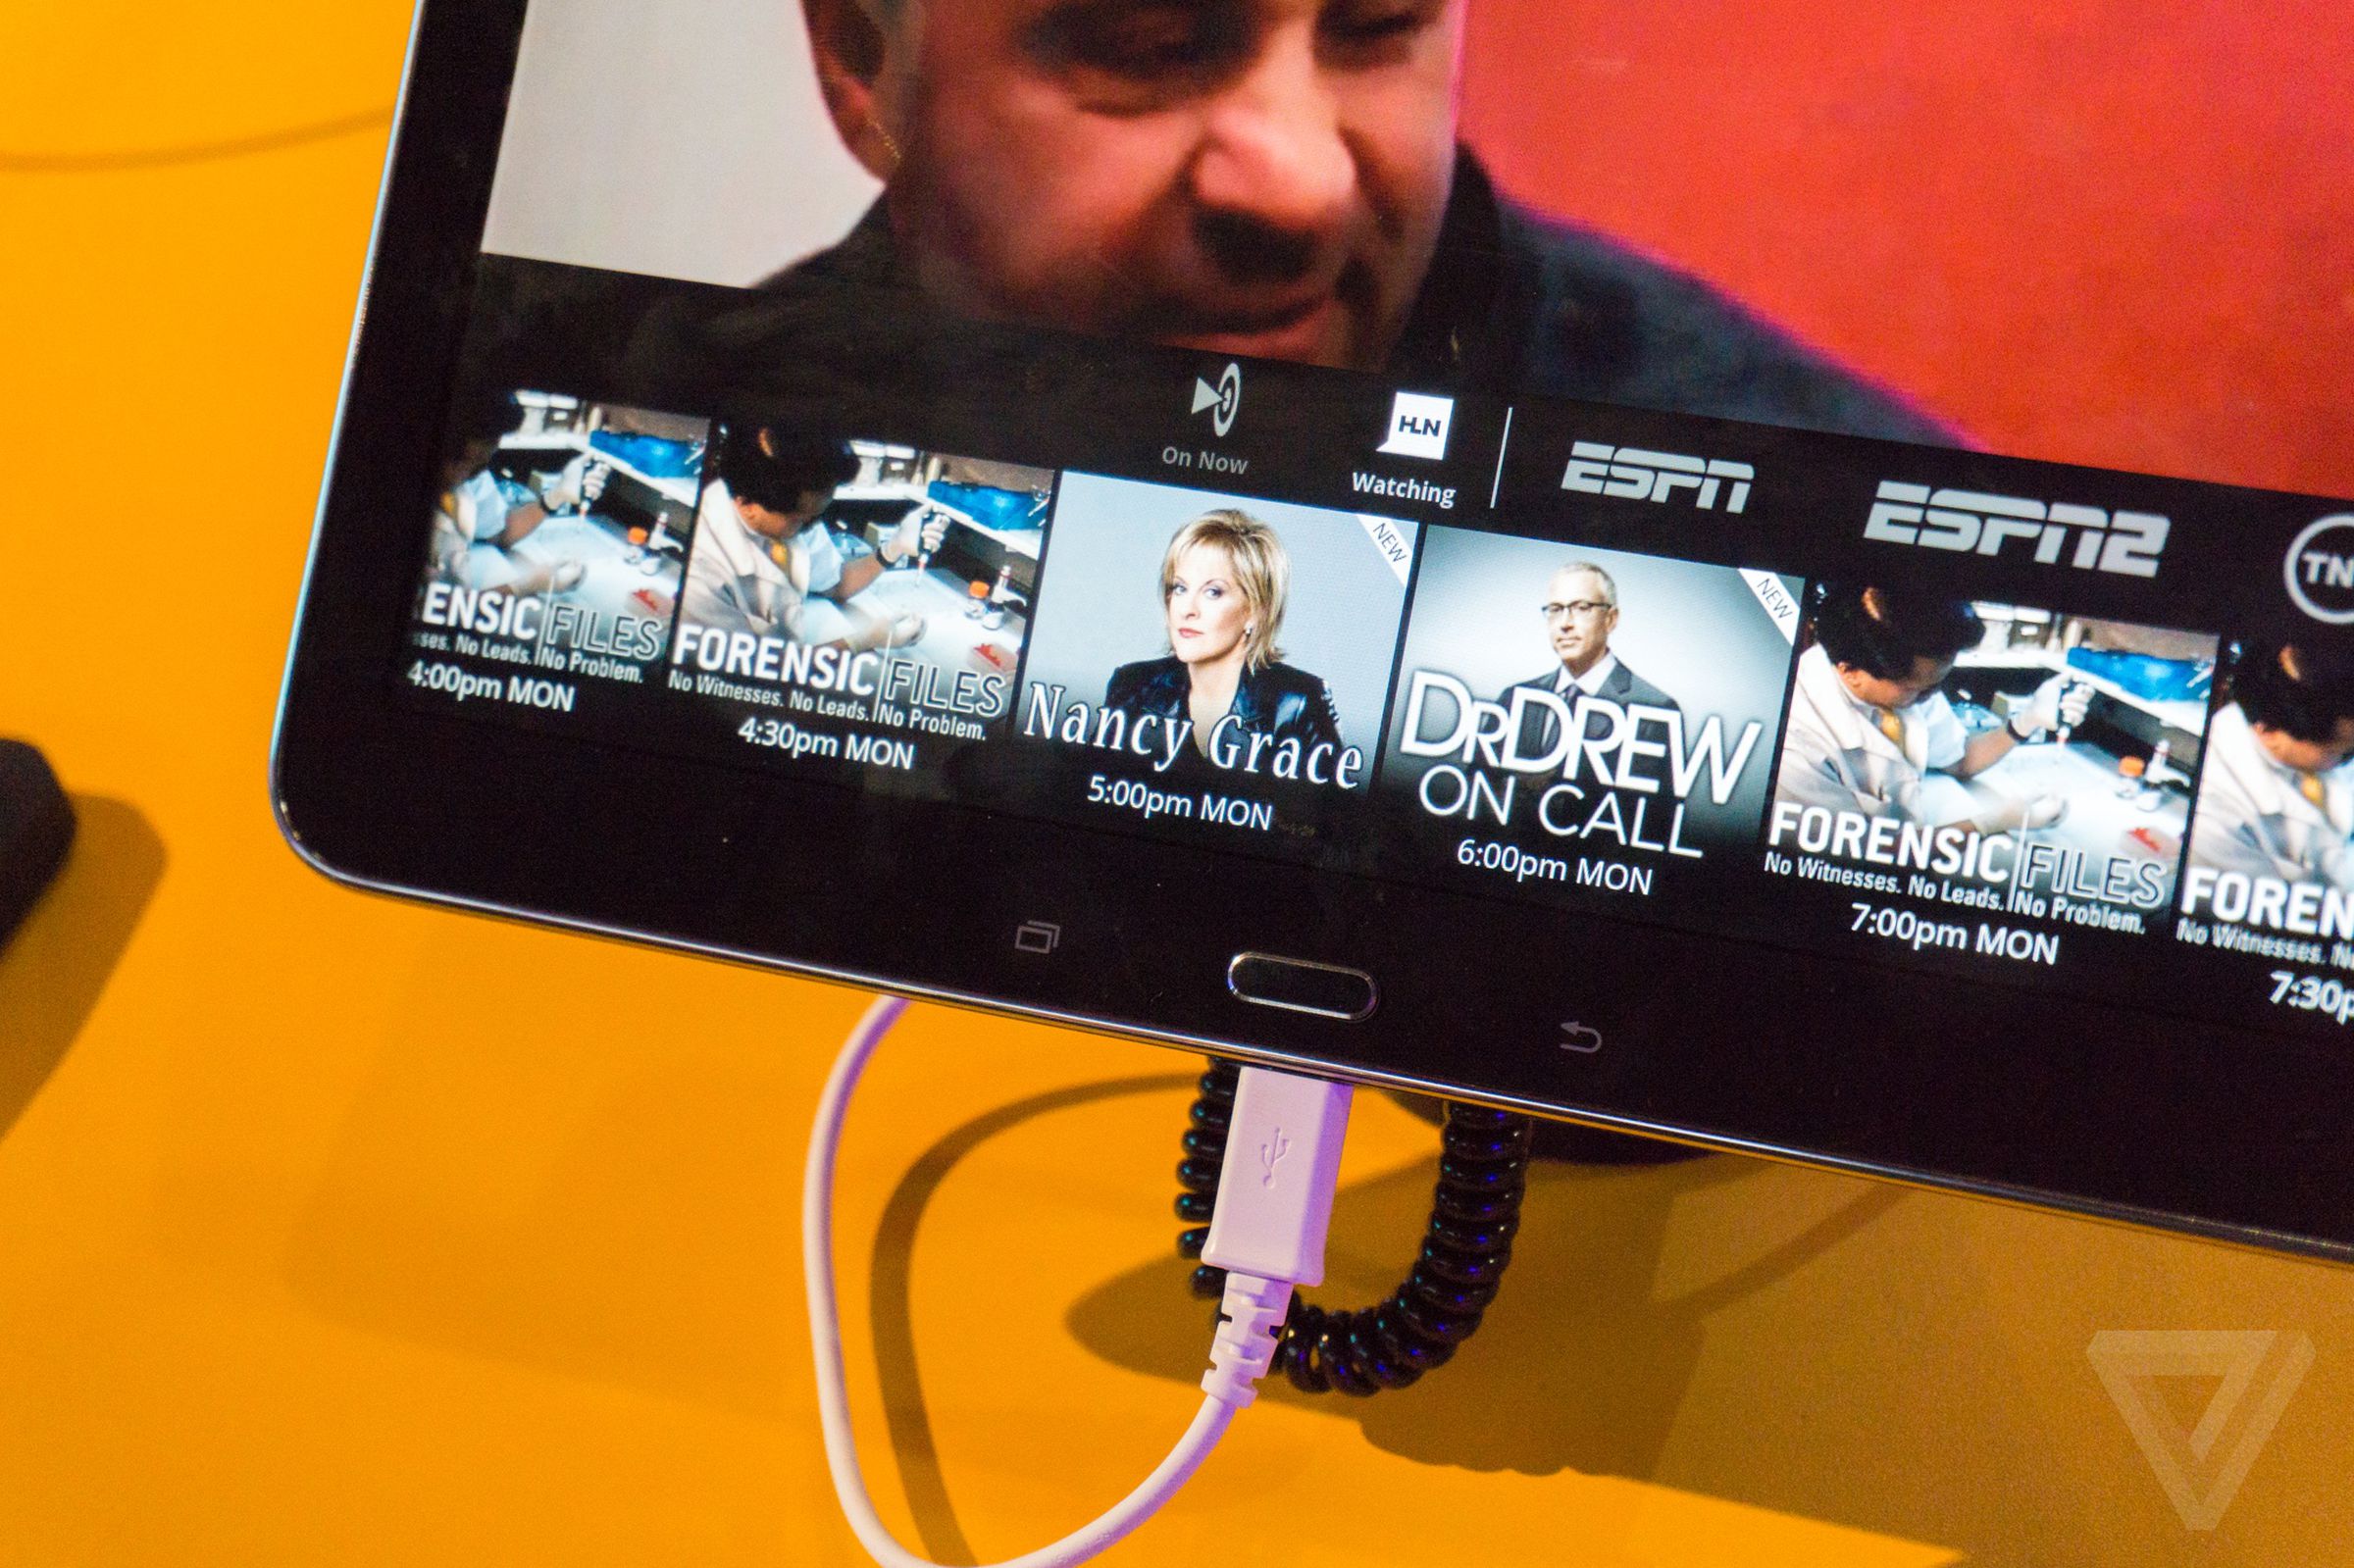 Sling TV hands-on photos